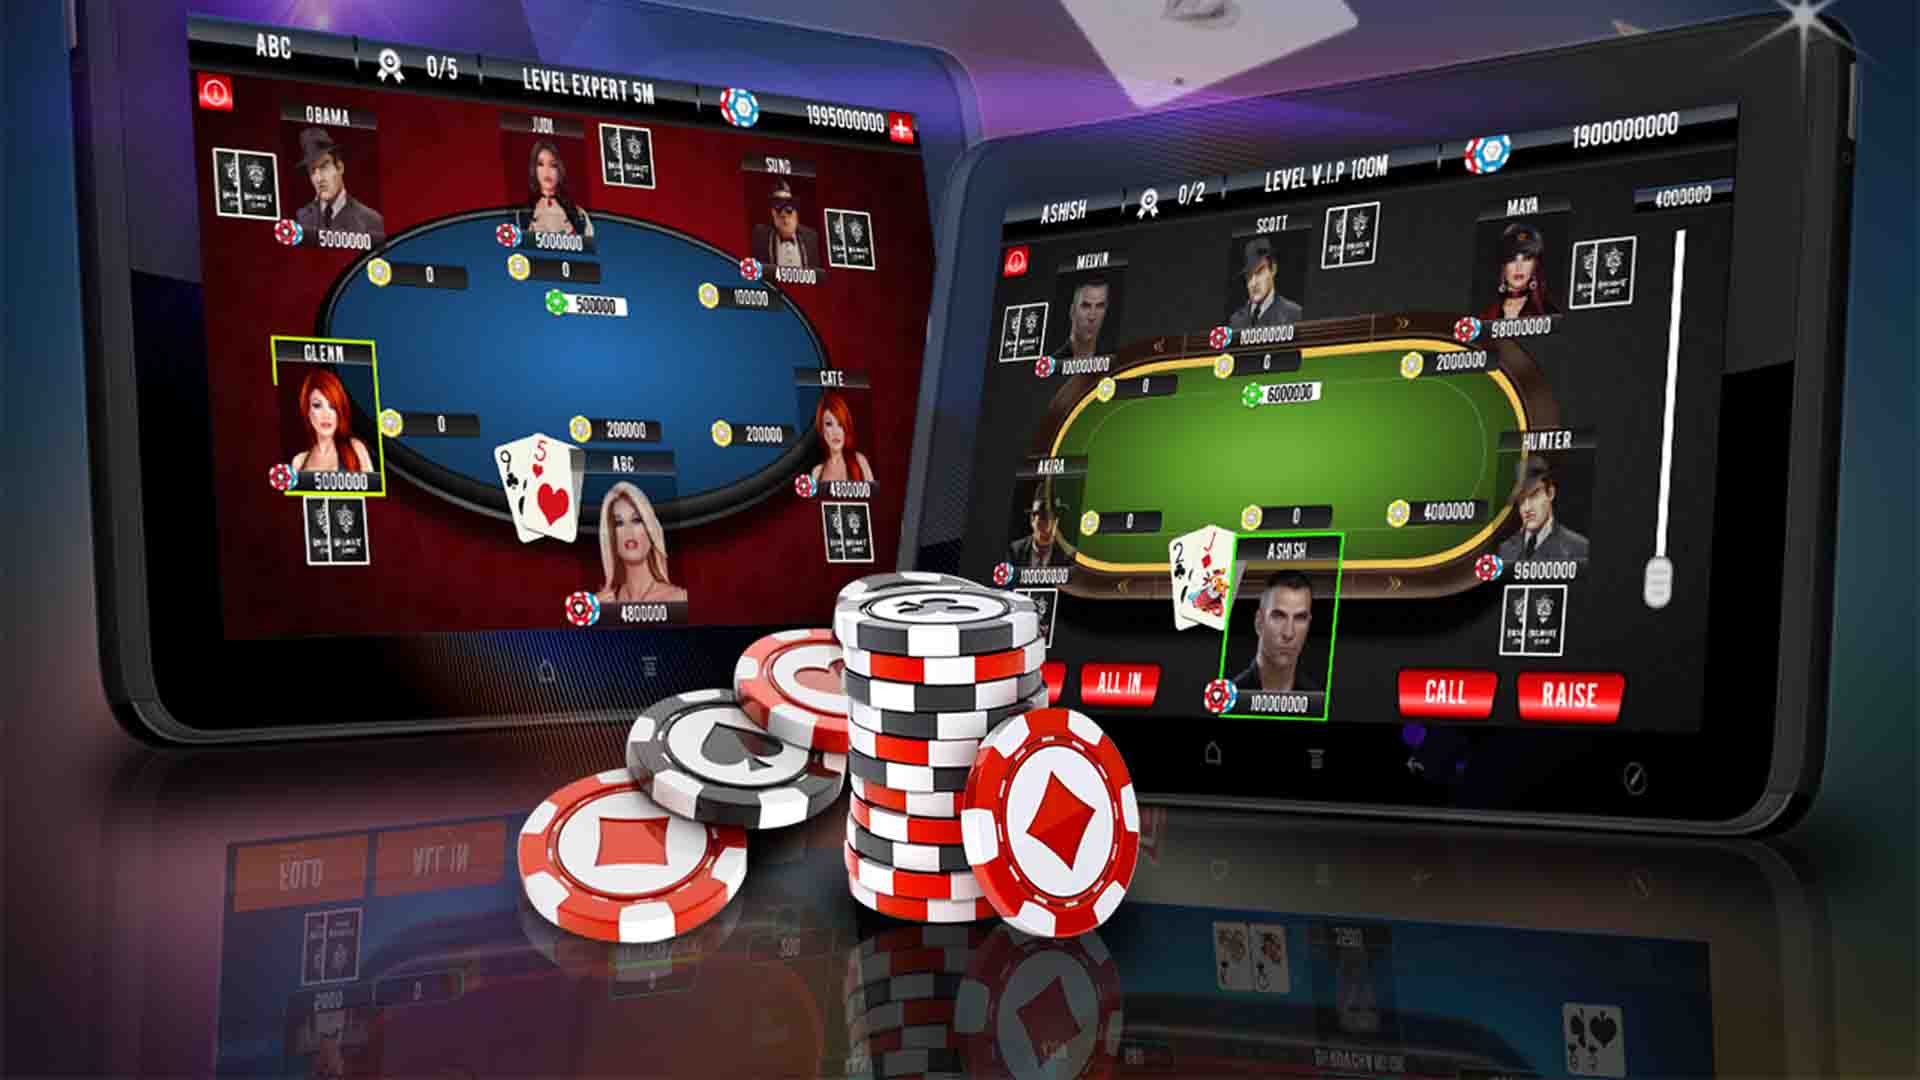 Online casino demo games – advantages and functionality at a glance